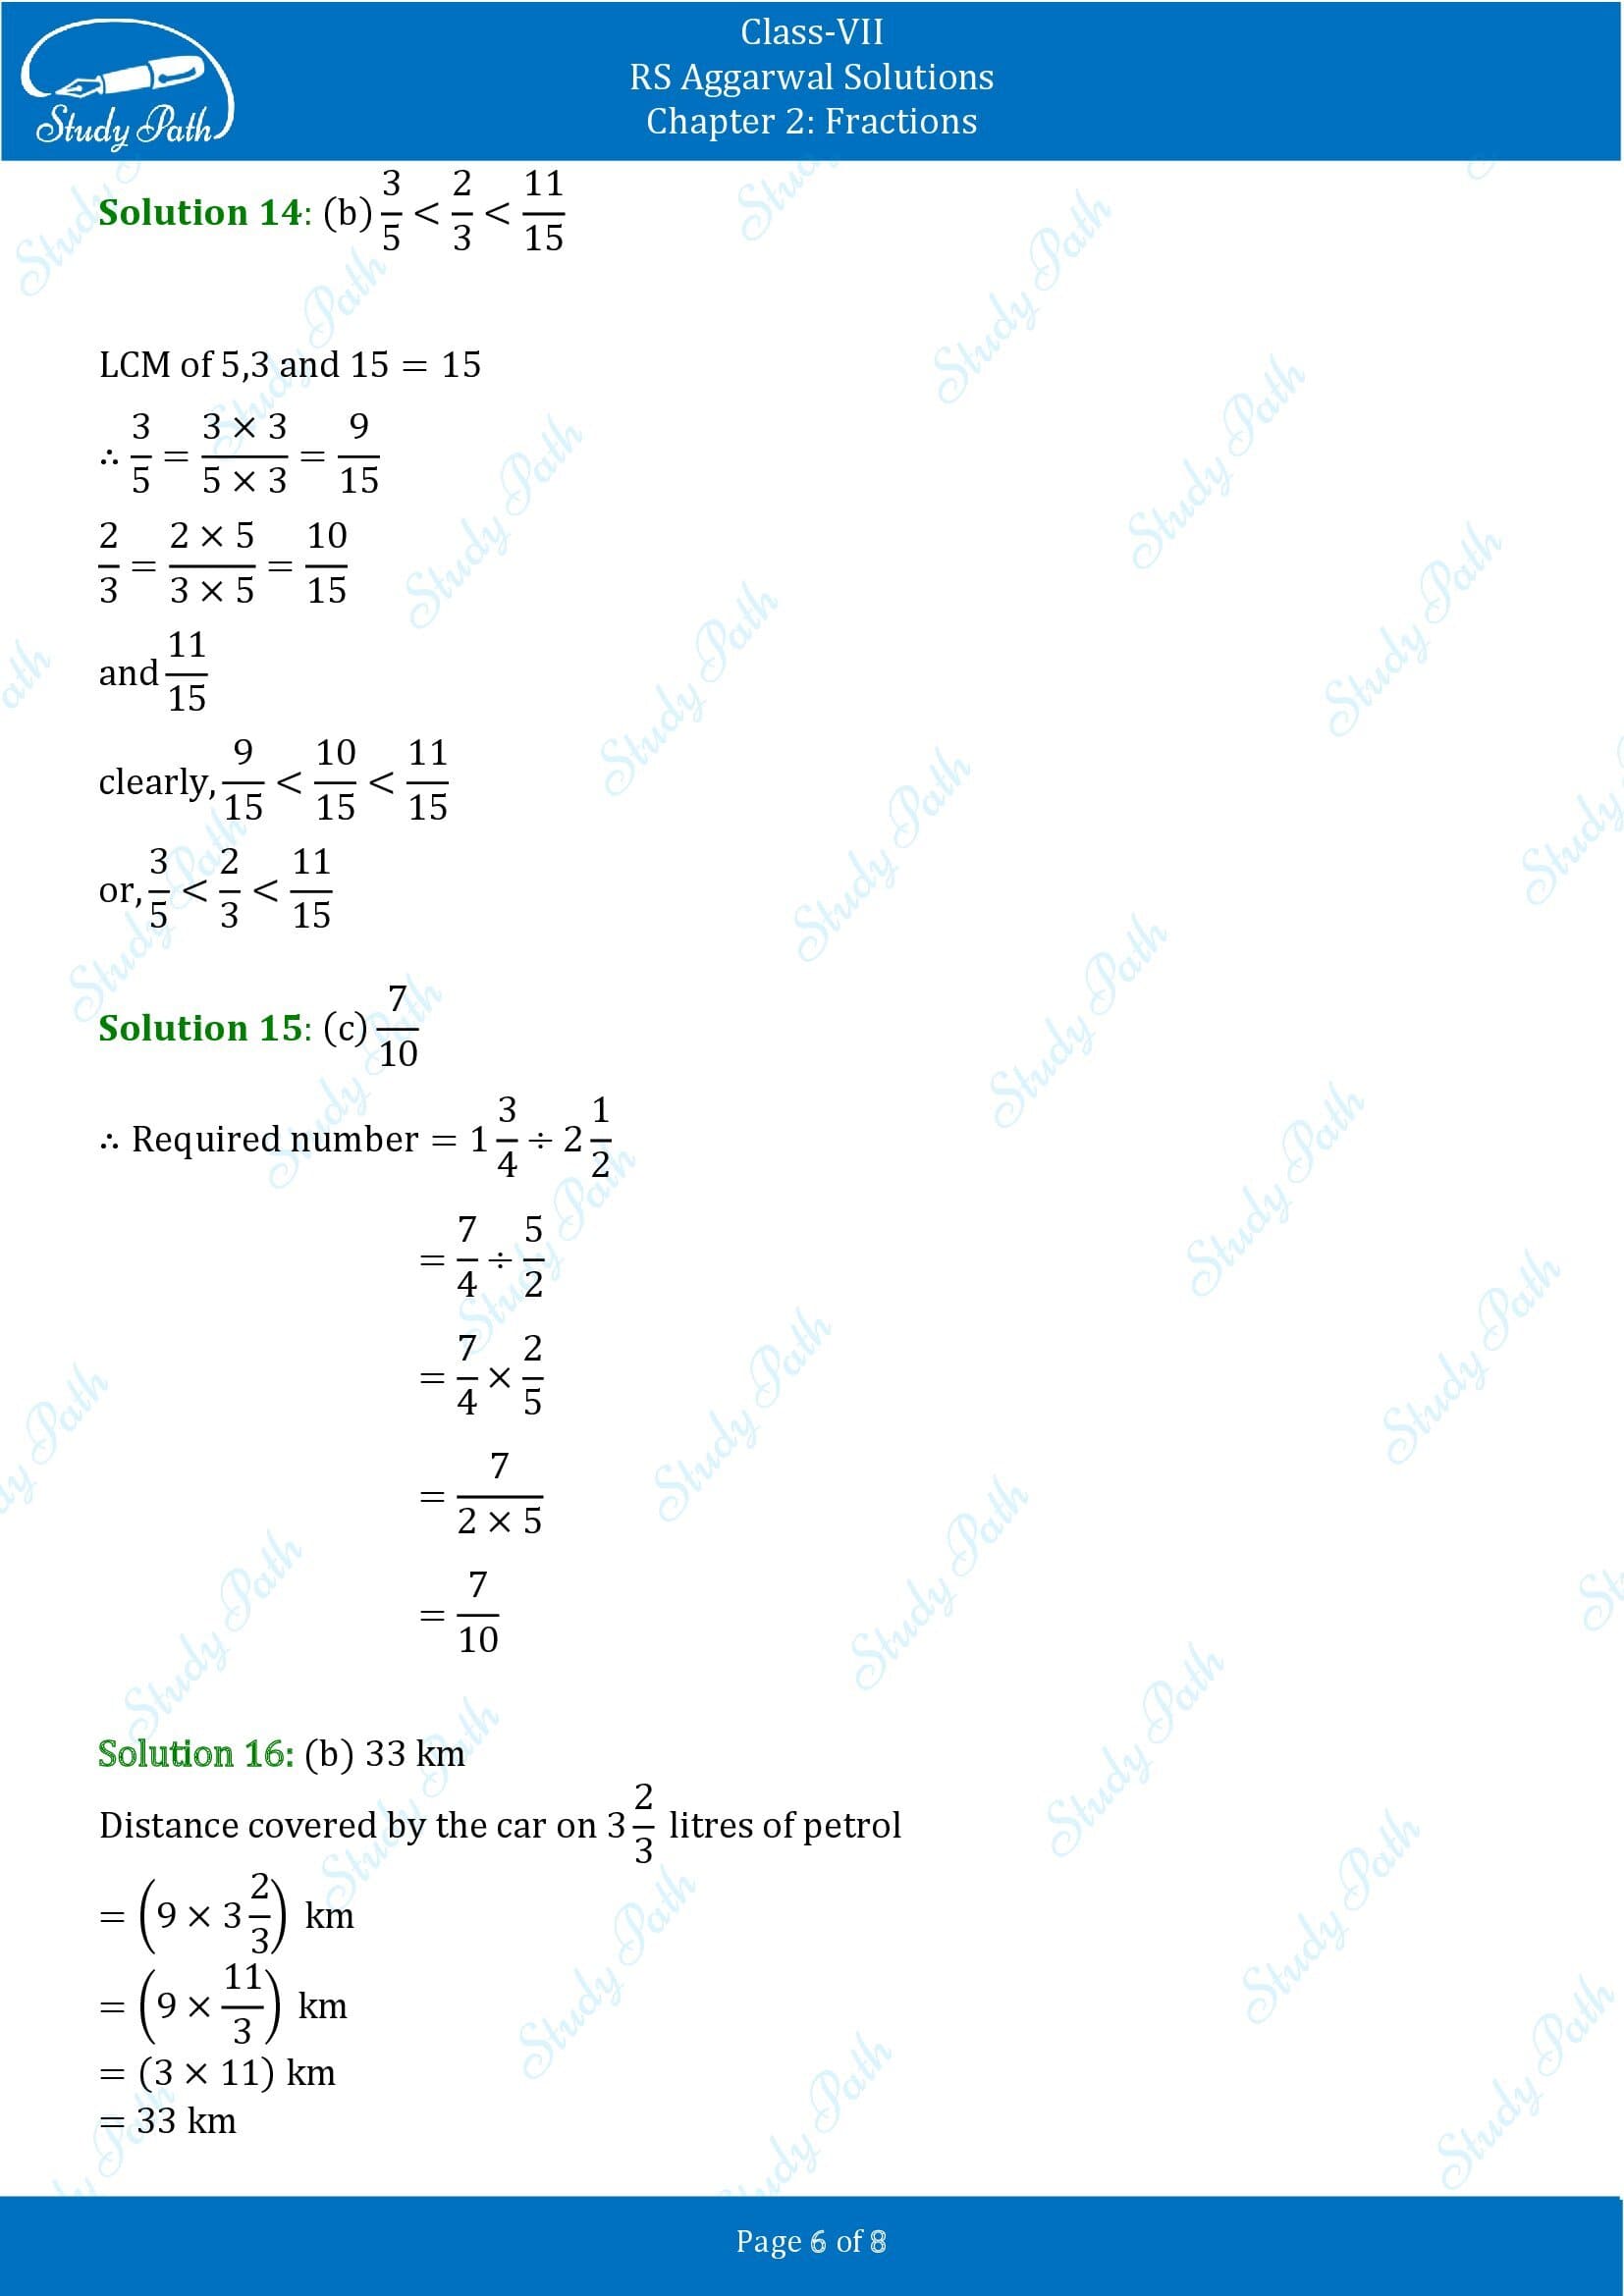 RS Aggarwal Solutions Class 7 Chapter 2 Fractions Test Paper 00006